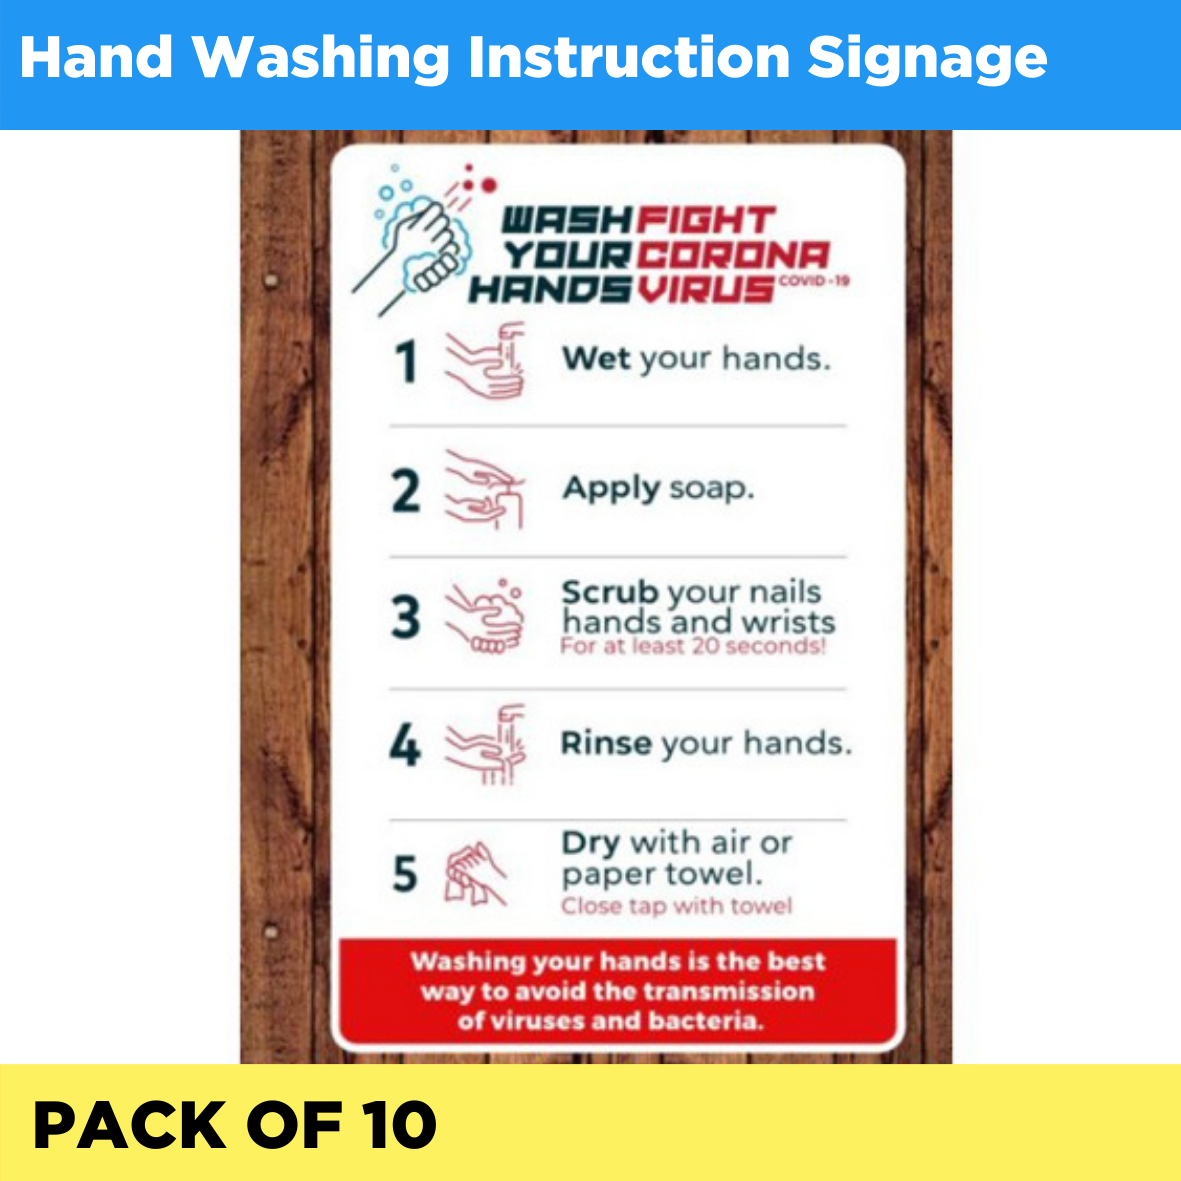 Hand washing instructions signage - Pack of 10 (Listing ID: 6617452937285)